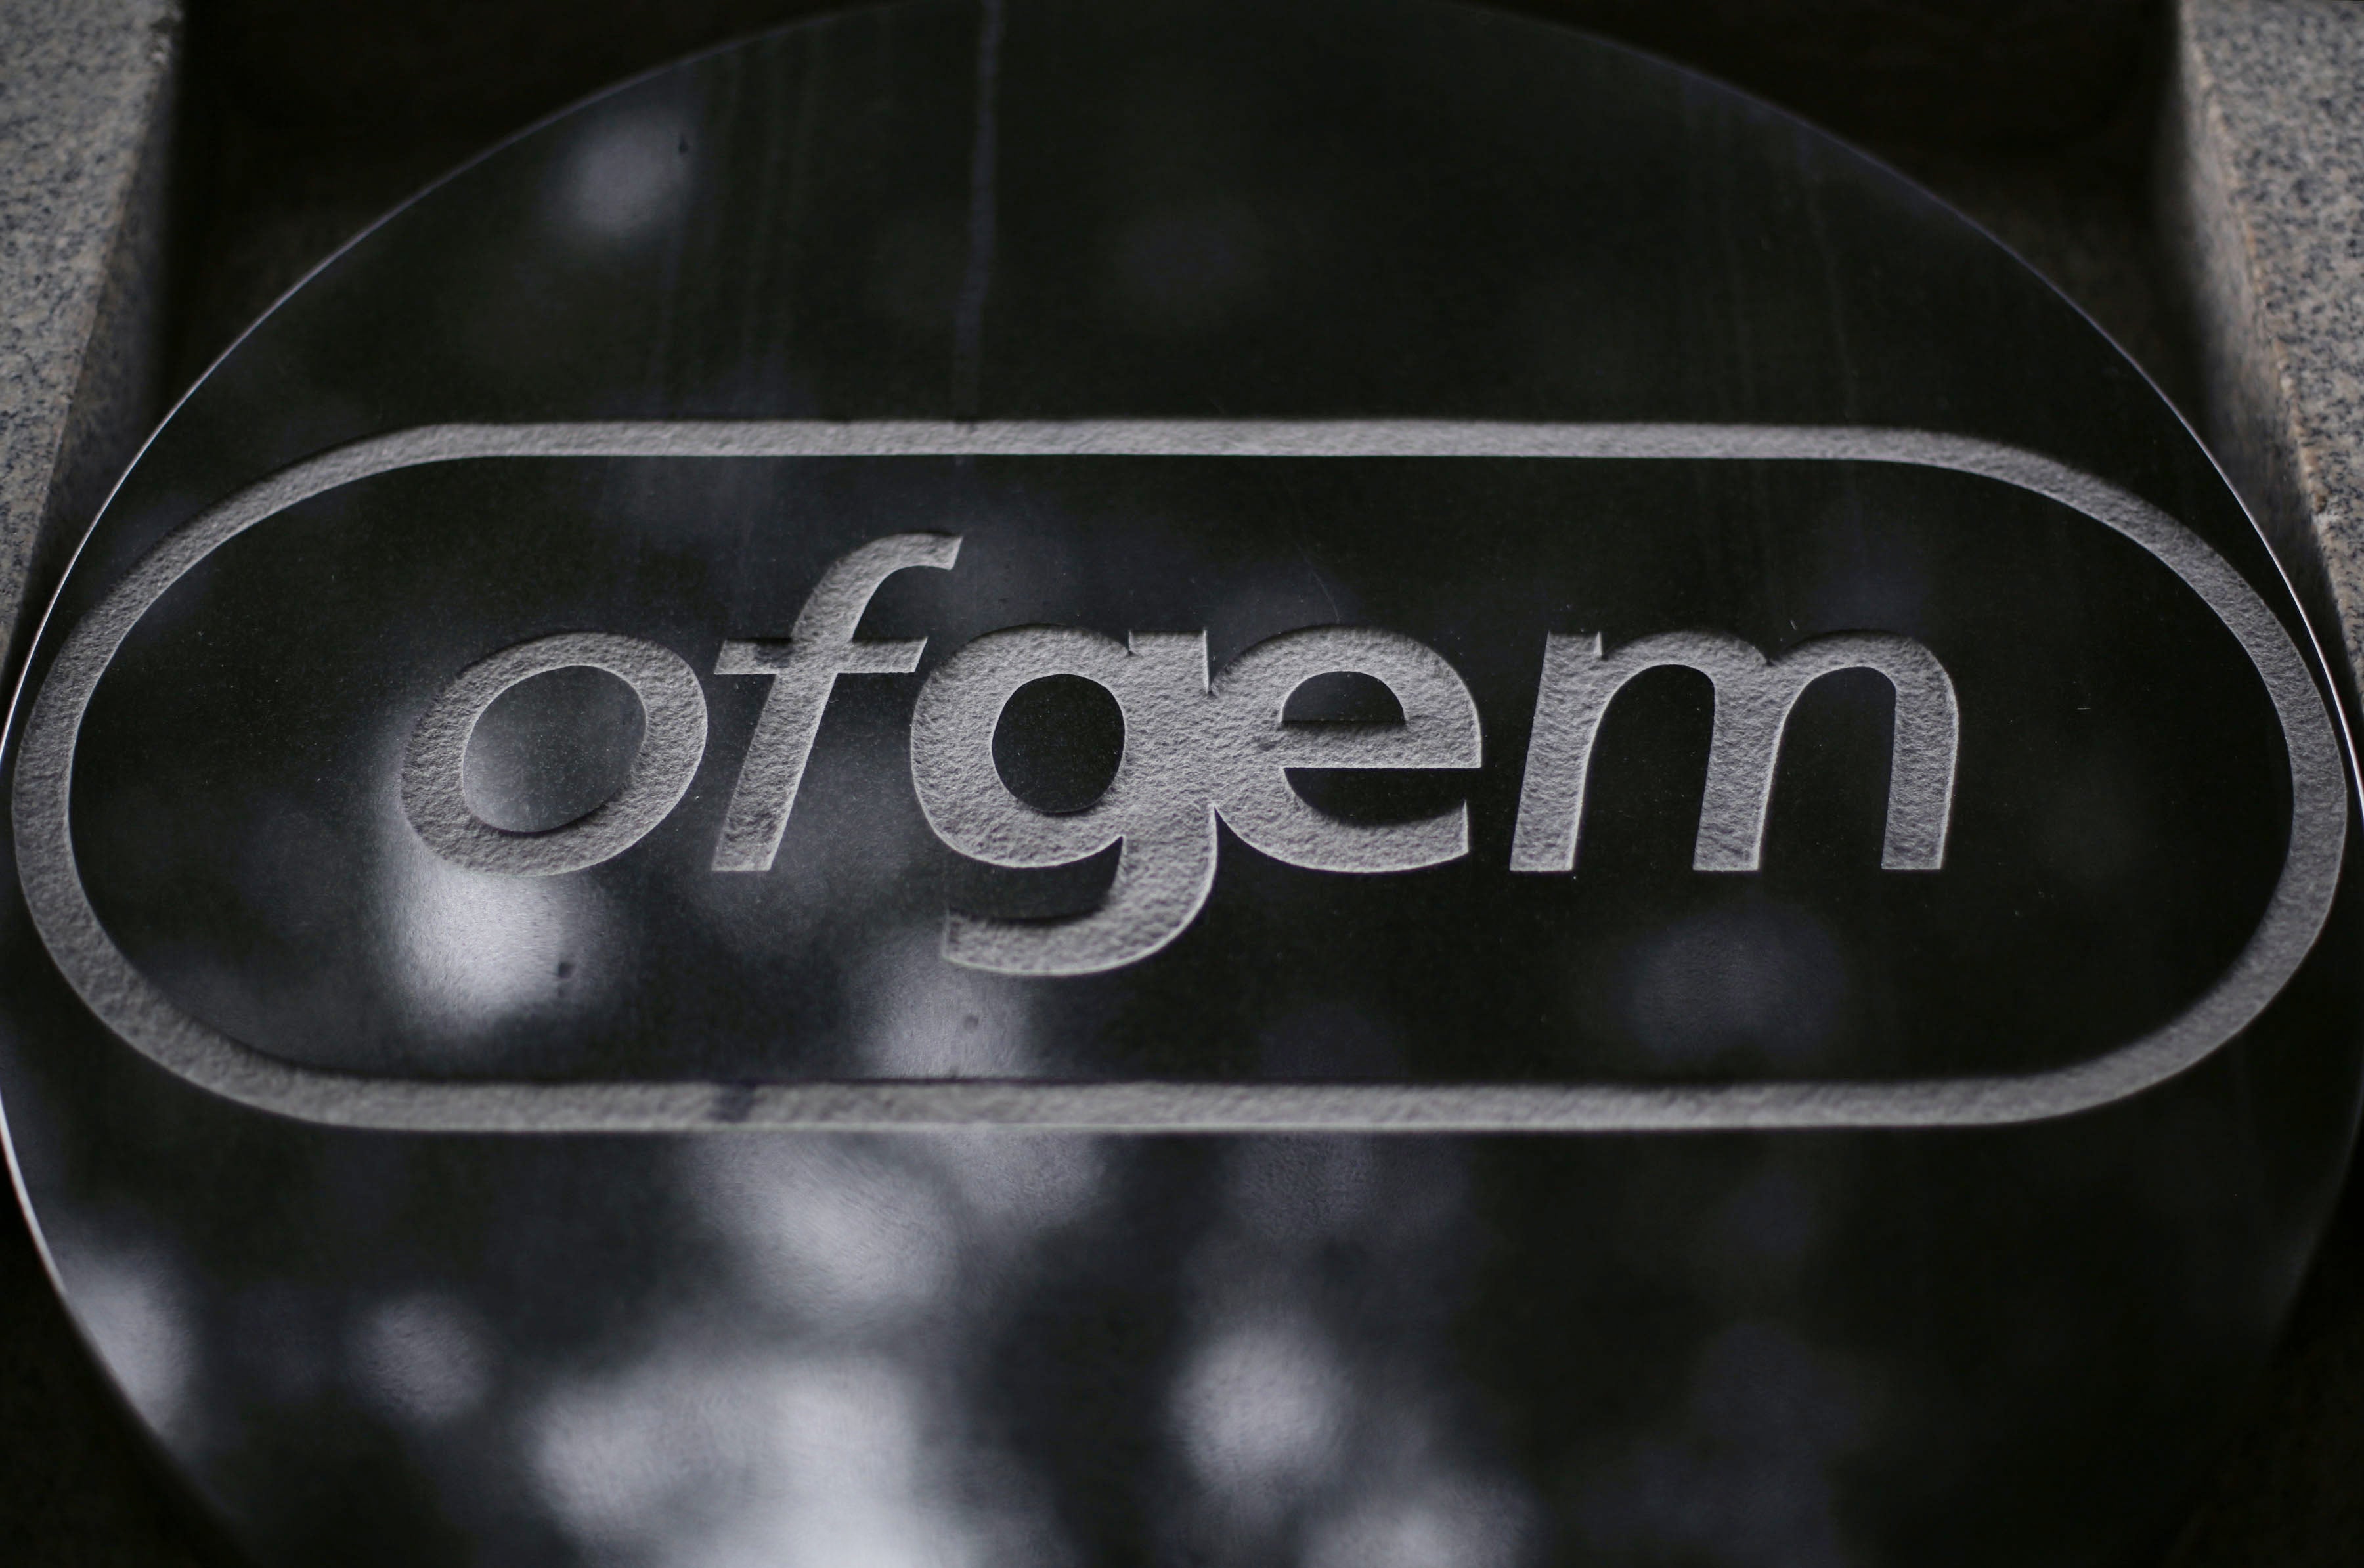 Regulator Ofgem has a system to help customers when suppliers fail, but experts worry this will not be enough. (Yui Mok/PA)